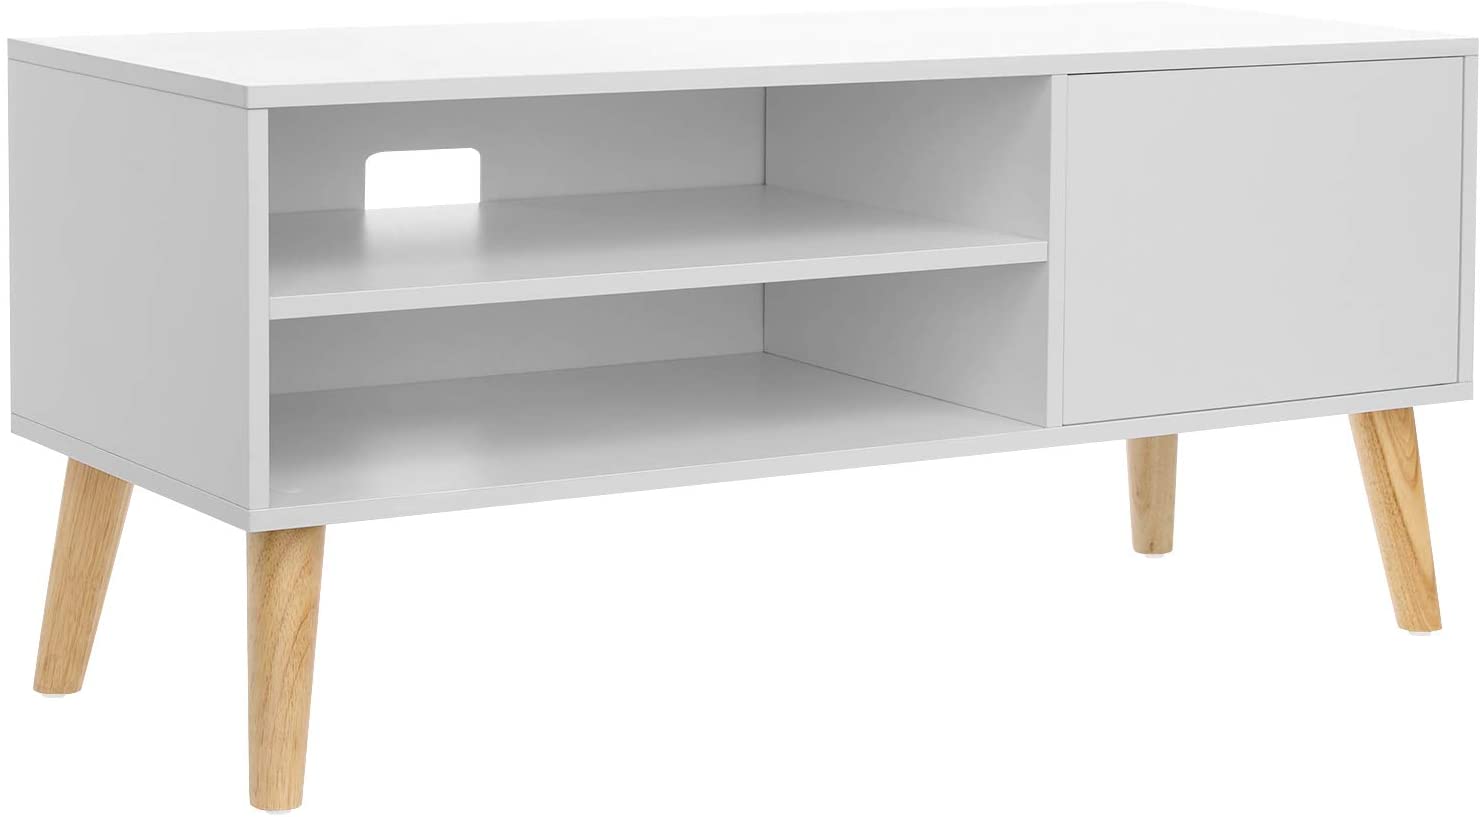 Scandinavian TV Stand, Retro TV Console, Entertainment Centre for Flat Screen TV, Gaming Consoles, in Living Room, Entertainment Room, Office, White LTV09WT RAW58.dk 